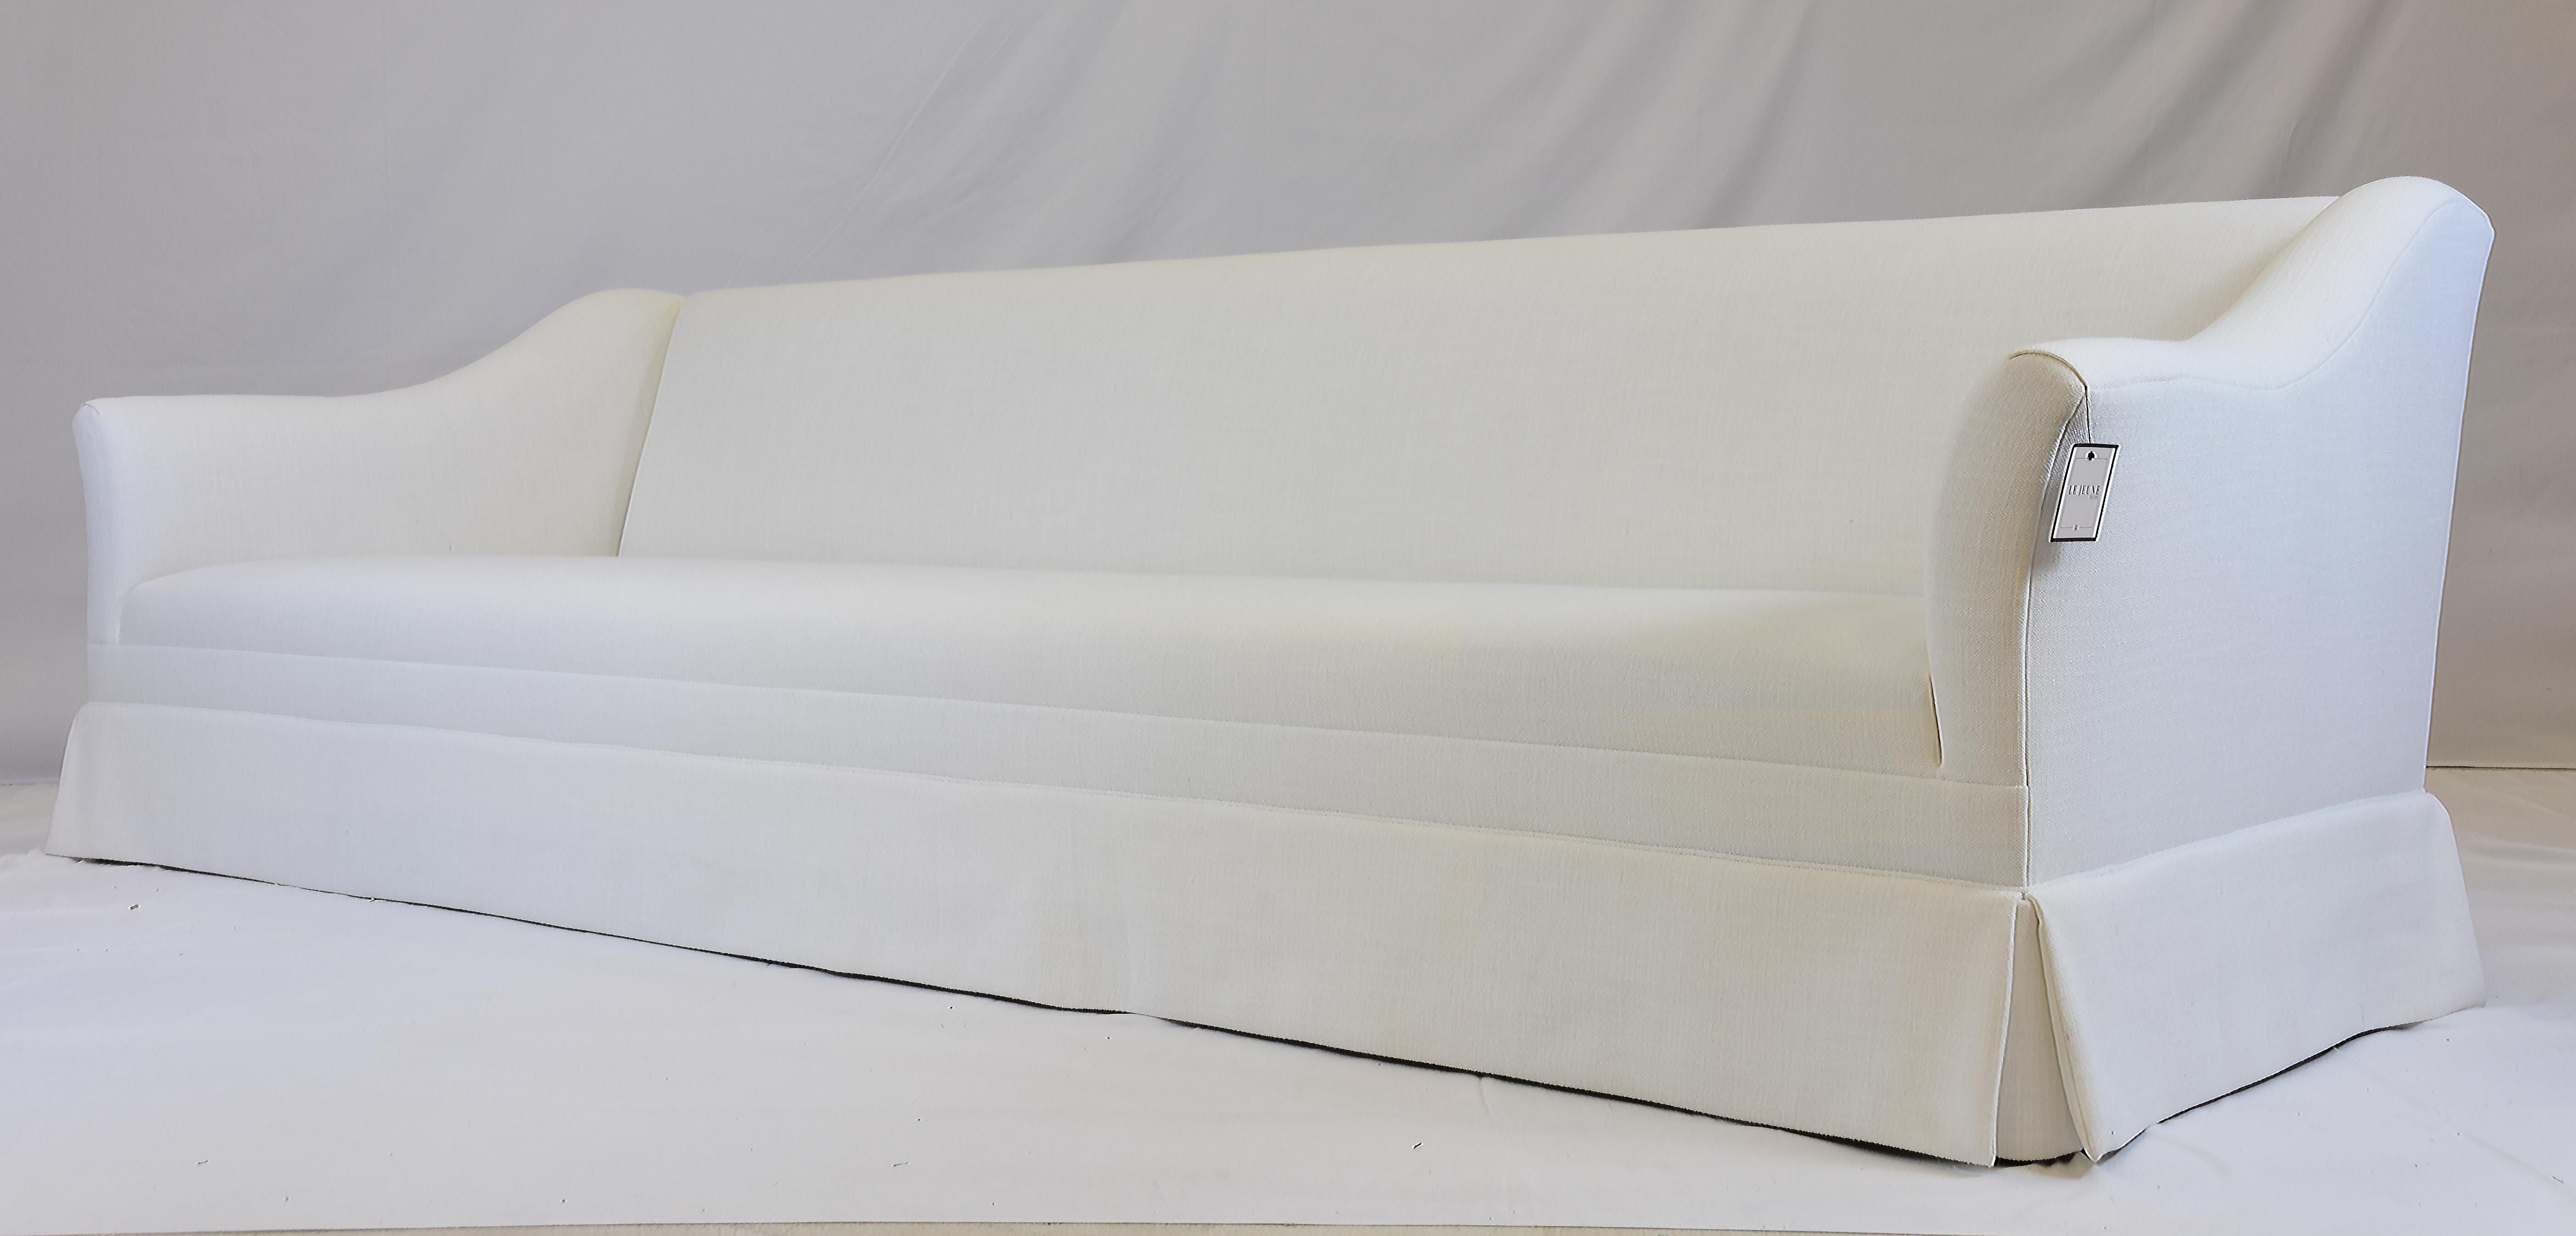 Le Jeune Upholstery Lucca Sofa Showroom Model in White Linen

Offered for sale is a Le jeune Upholstery LUCCA S10.923	sofa showroom model. This long sofa has an elegance to its minimalistic design.  From a tight seat and back concept, to a low